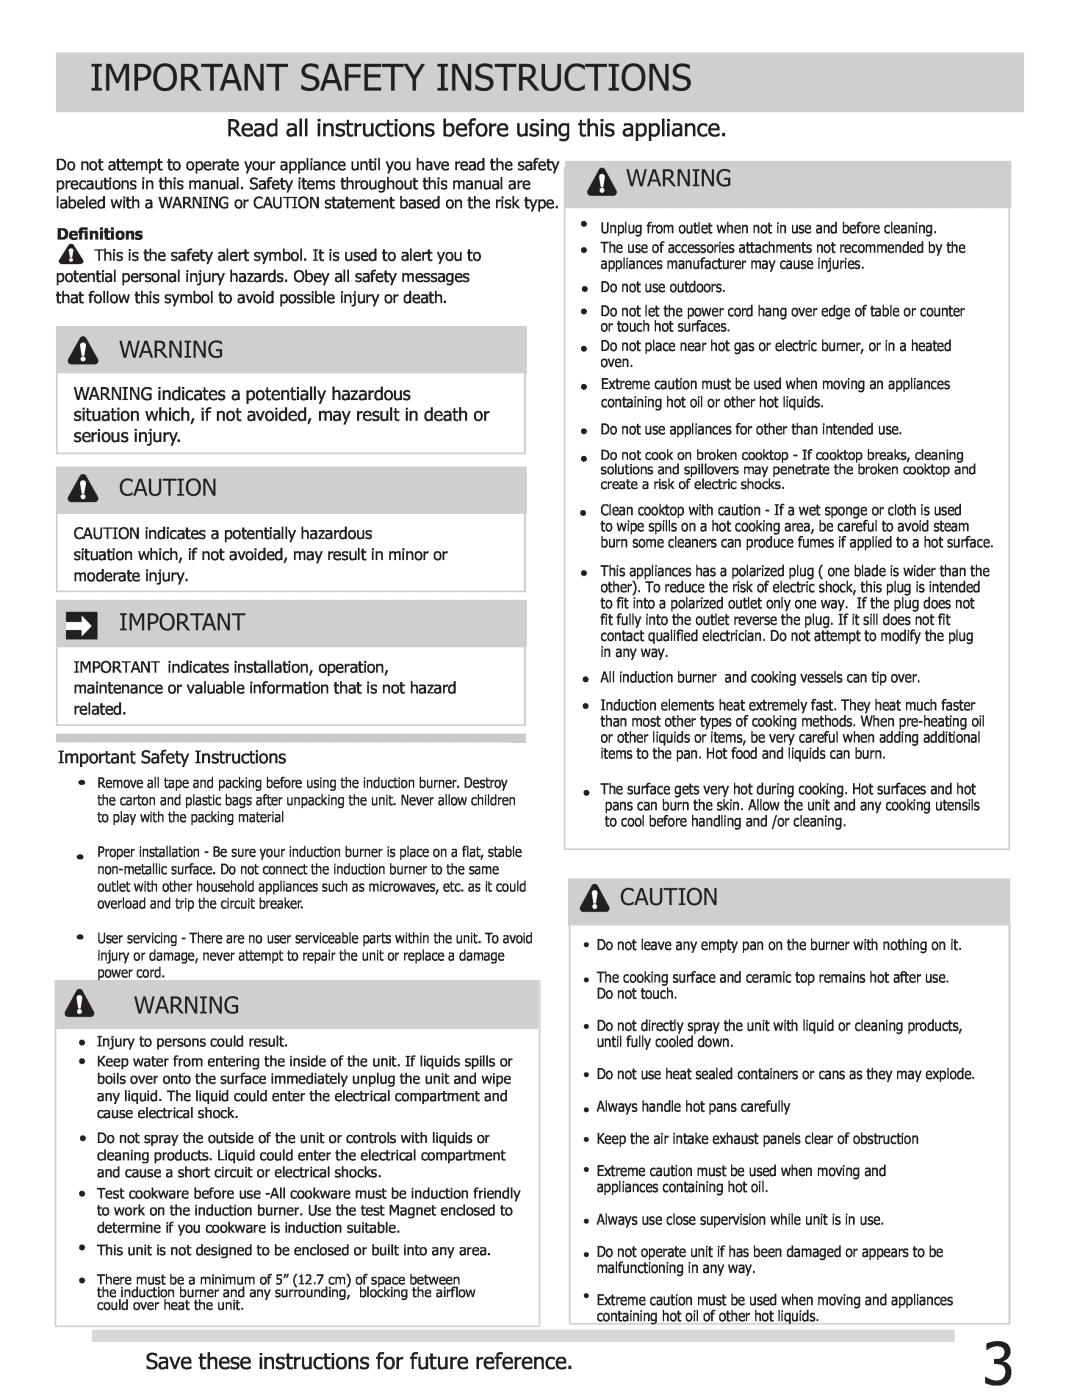 Frigidaire FGIC13P3KS Important Safety Instructions, Save these instructions for future reference, serious injury 